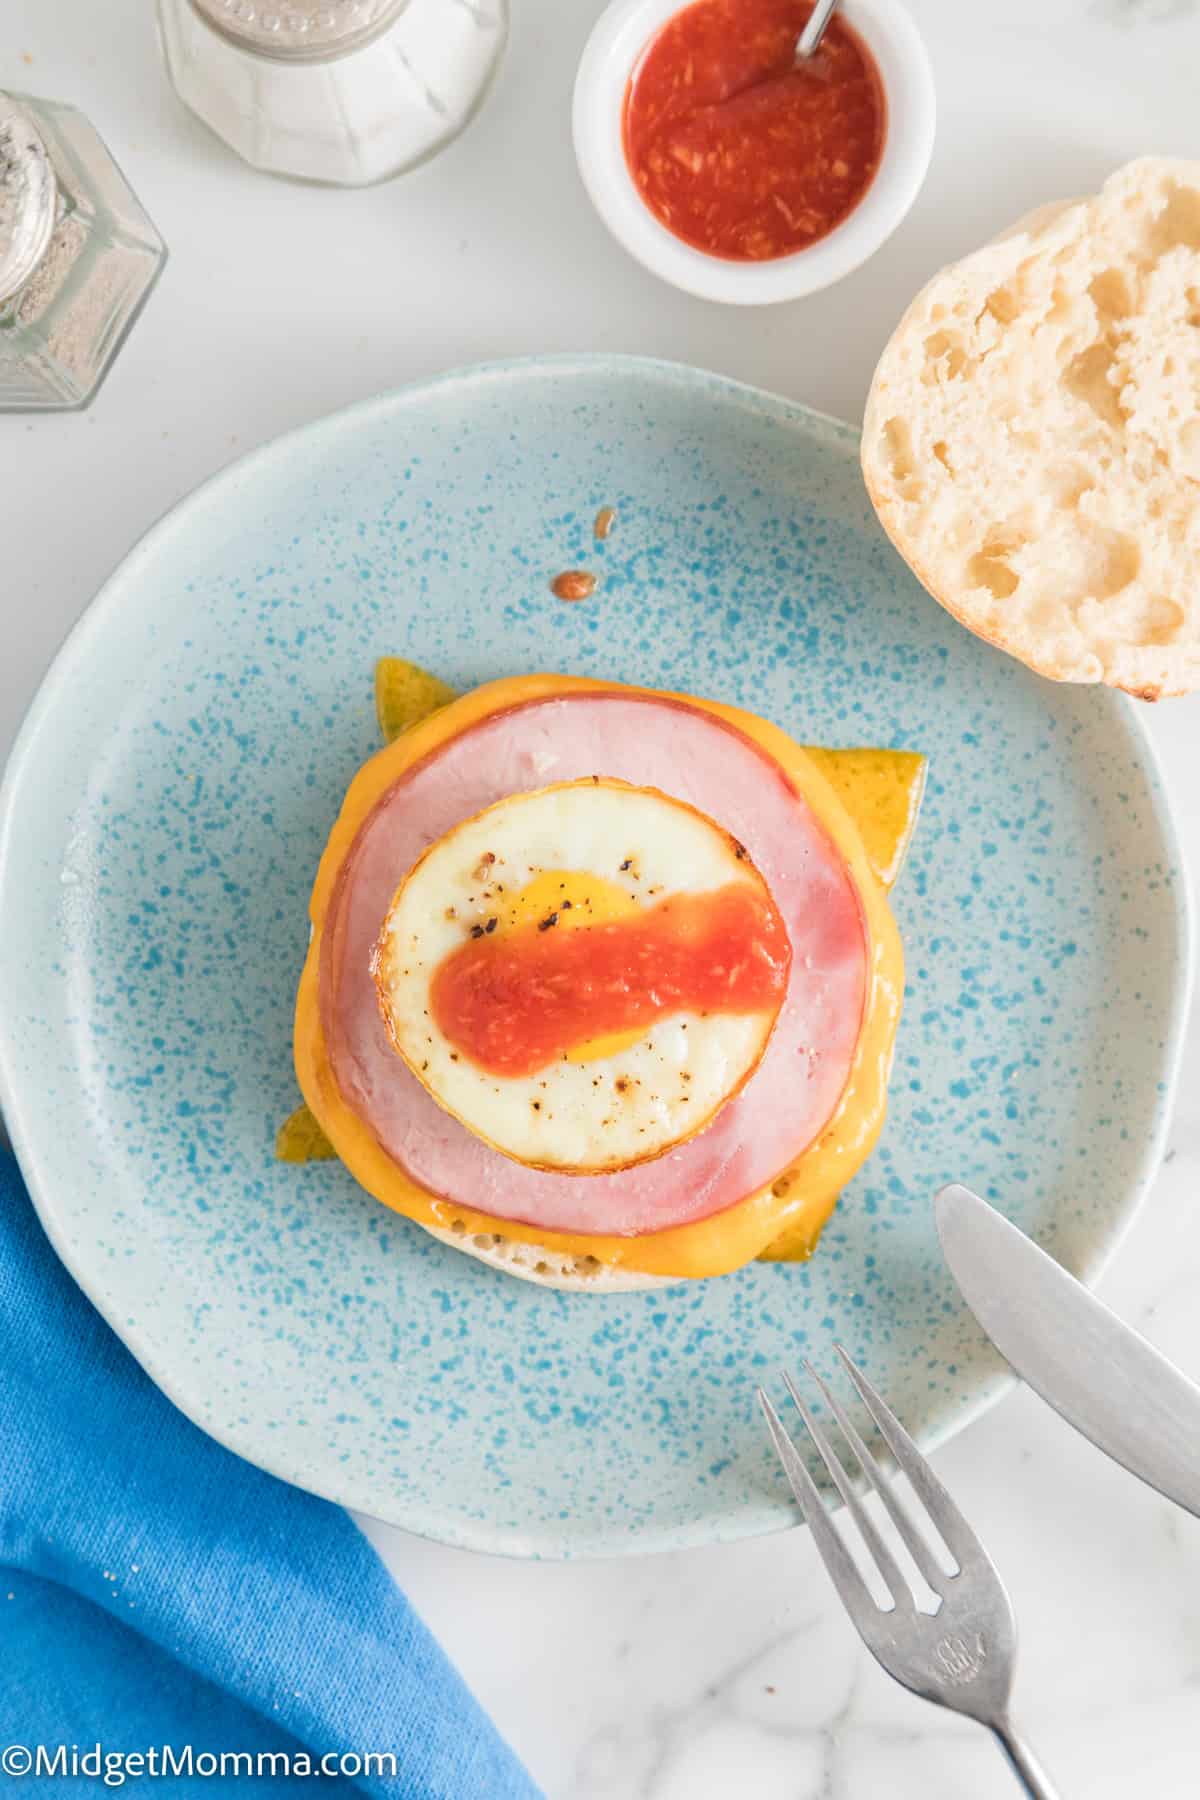 A breakfast sandwich on a blue plate, featuring cheese, ham, egg, and a strip of red sauce. The sandwich's top bun is off to the side. A fork, knife, small bowl of sauce, and salt shaker are also visible.